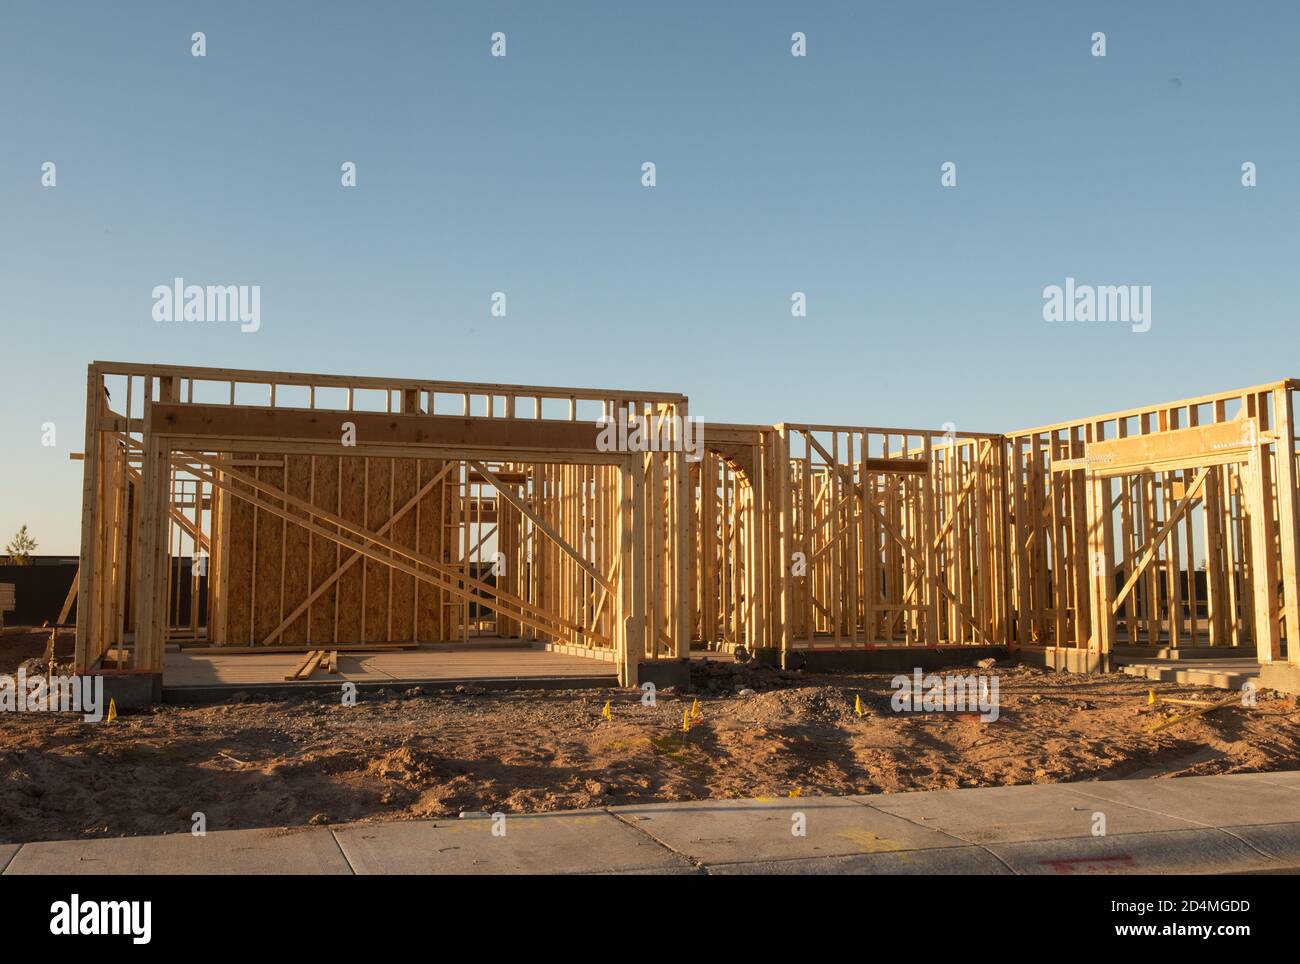 A partial view of a new house construction showing the wood frame before the siding and roofing stands in early morning light on a dirt lot, horizontal view. Stock Photo